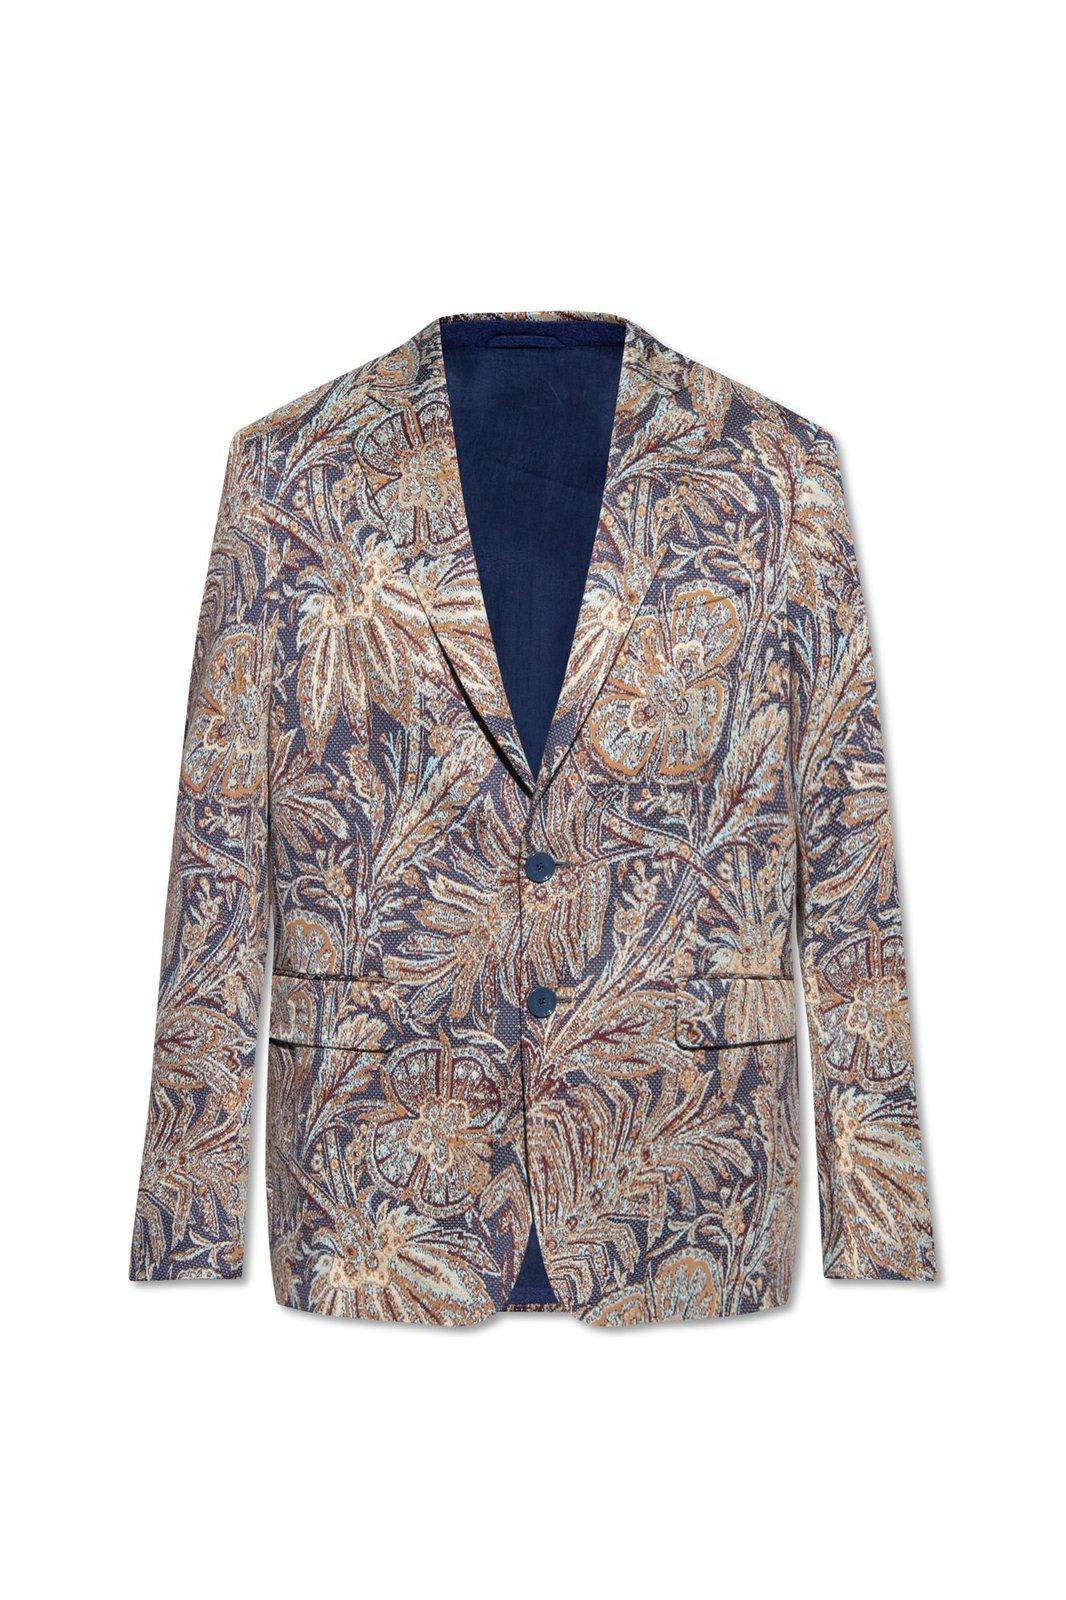 ETRO PATTERNED SINGLE BREASTED TAILORED BLAZER